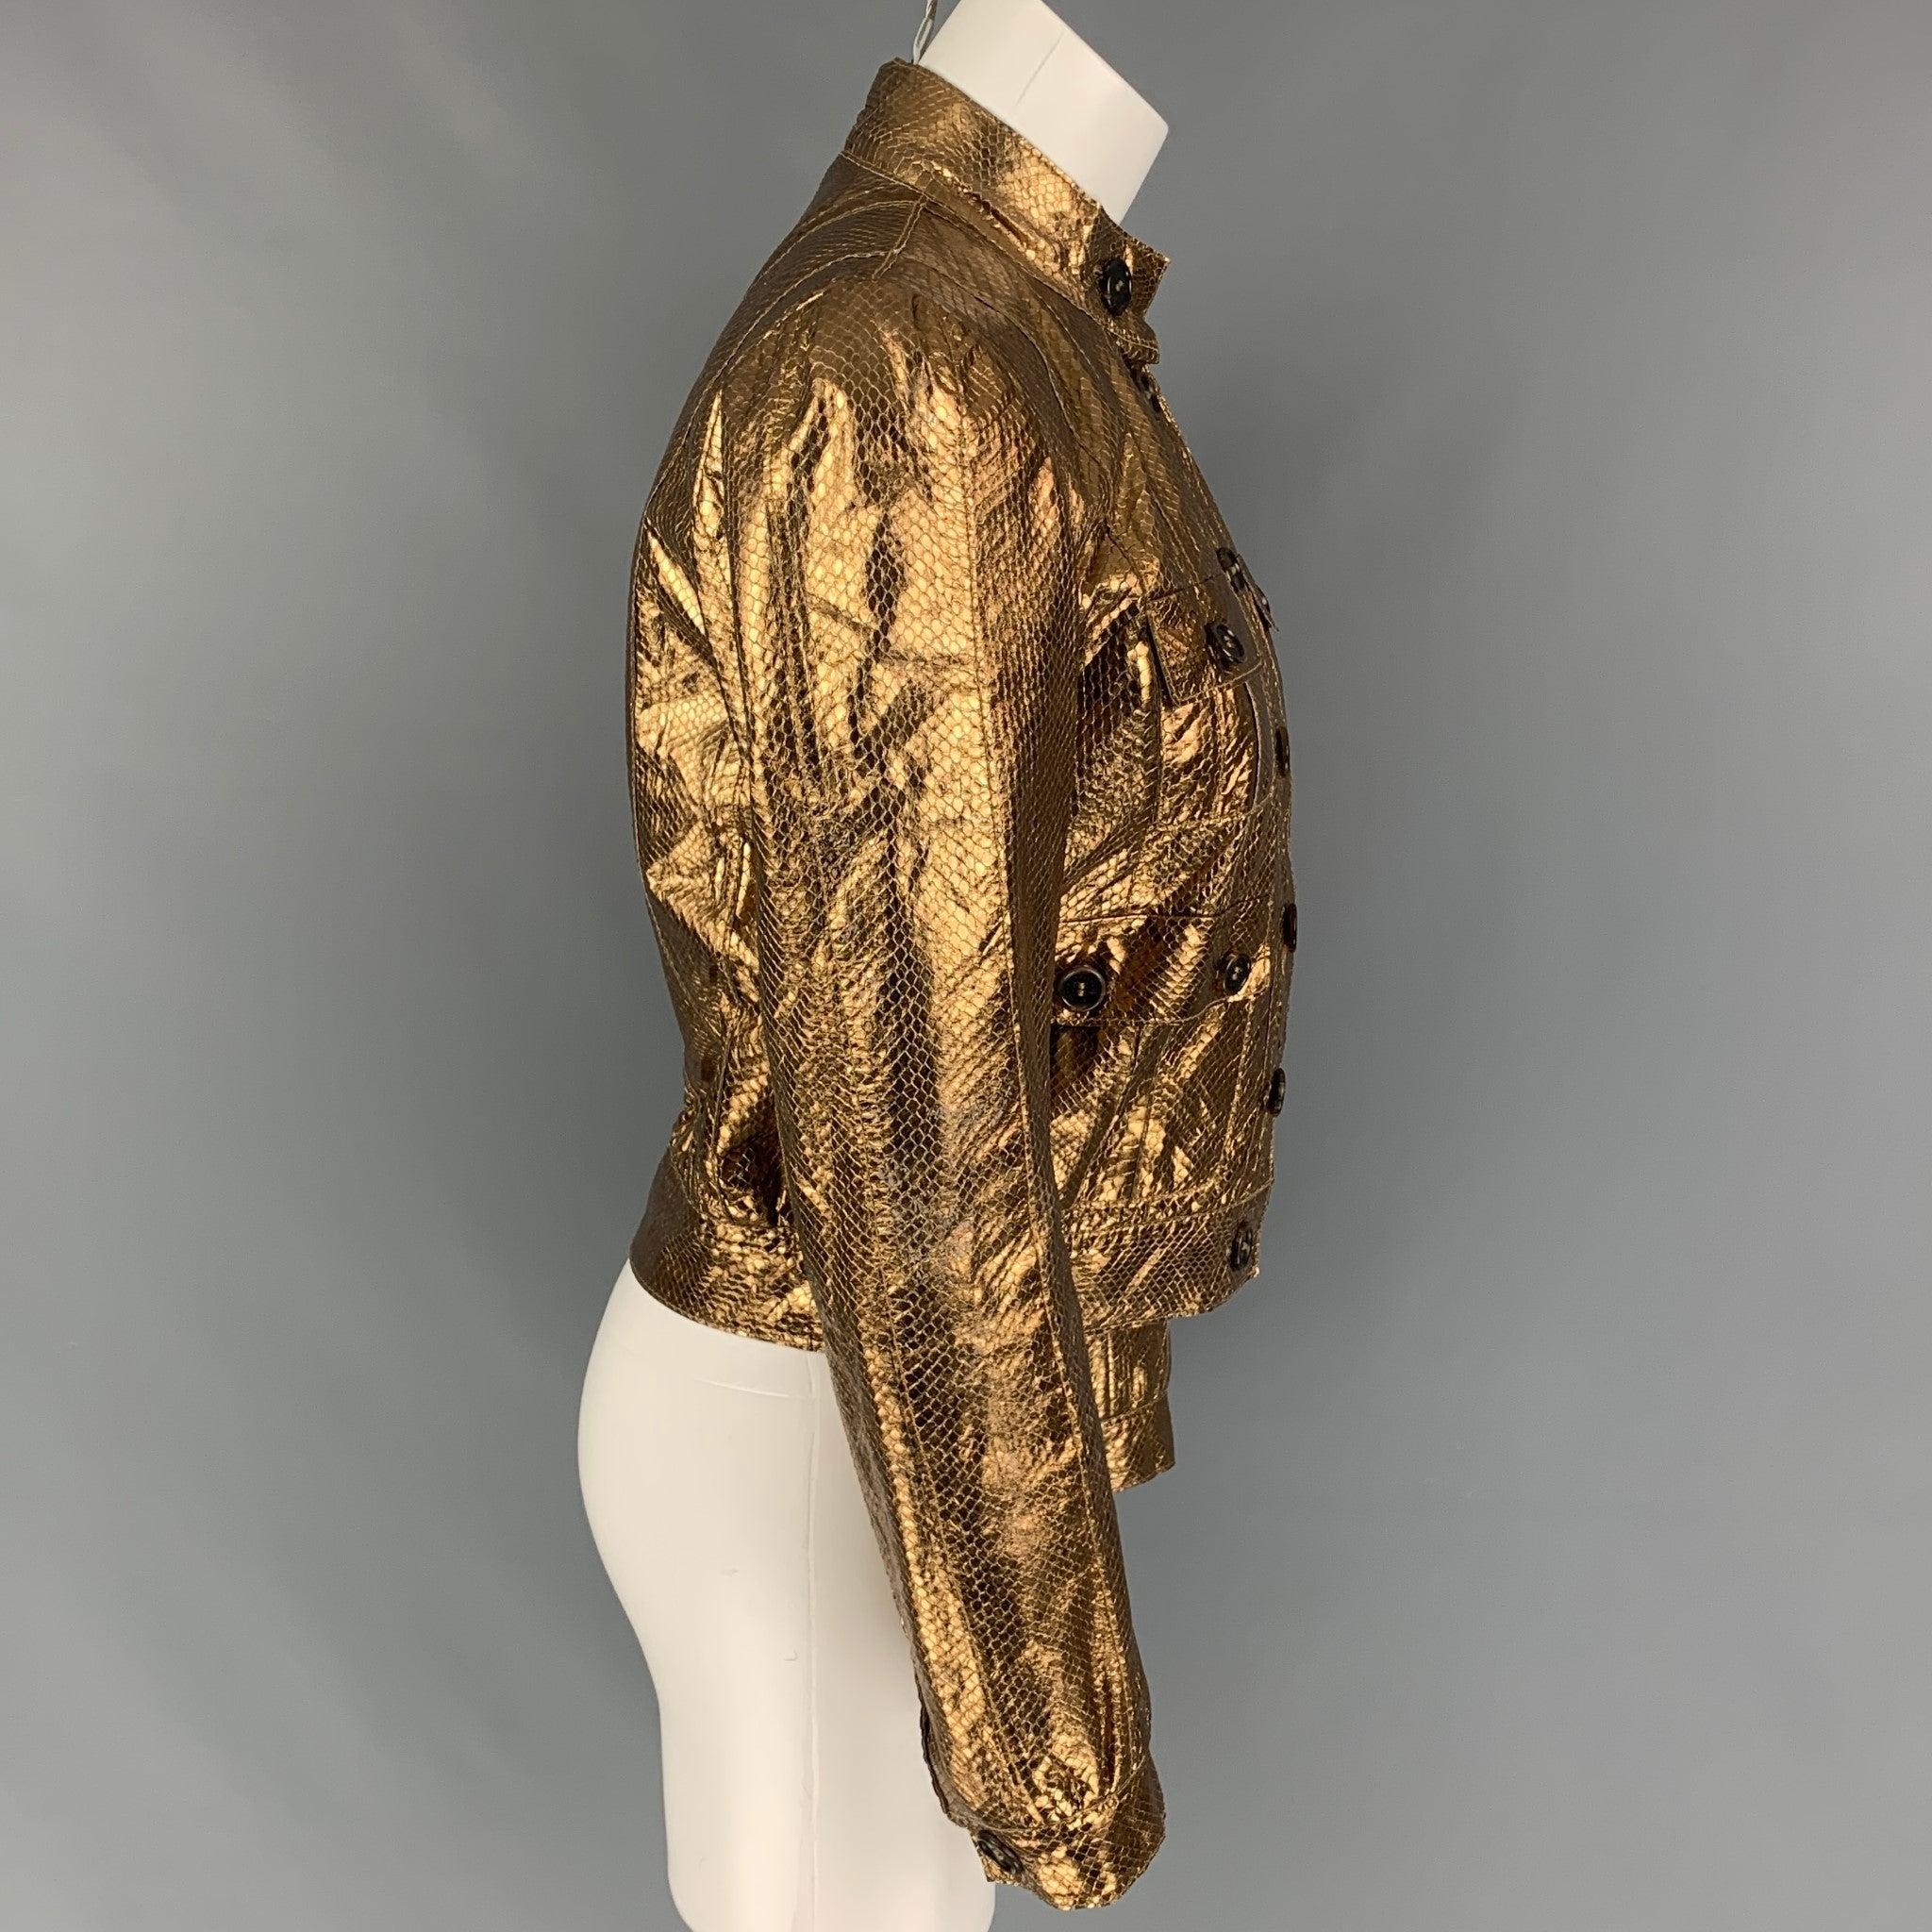 MULBERRY jacket comes in a gold metallic snake skin leather featuring a cropped style, patch pockets, and a buttoned closure.
Very Good
Pre-Owned Condition. 

Marked:   UK 12 / USA 8 / EUR 42 

Measurements: 
 
Shoulder: 15.5 inches Bust: 40 inches 